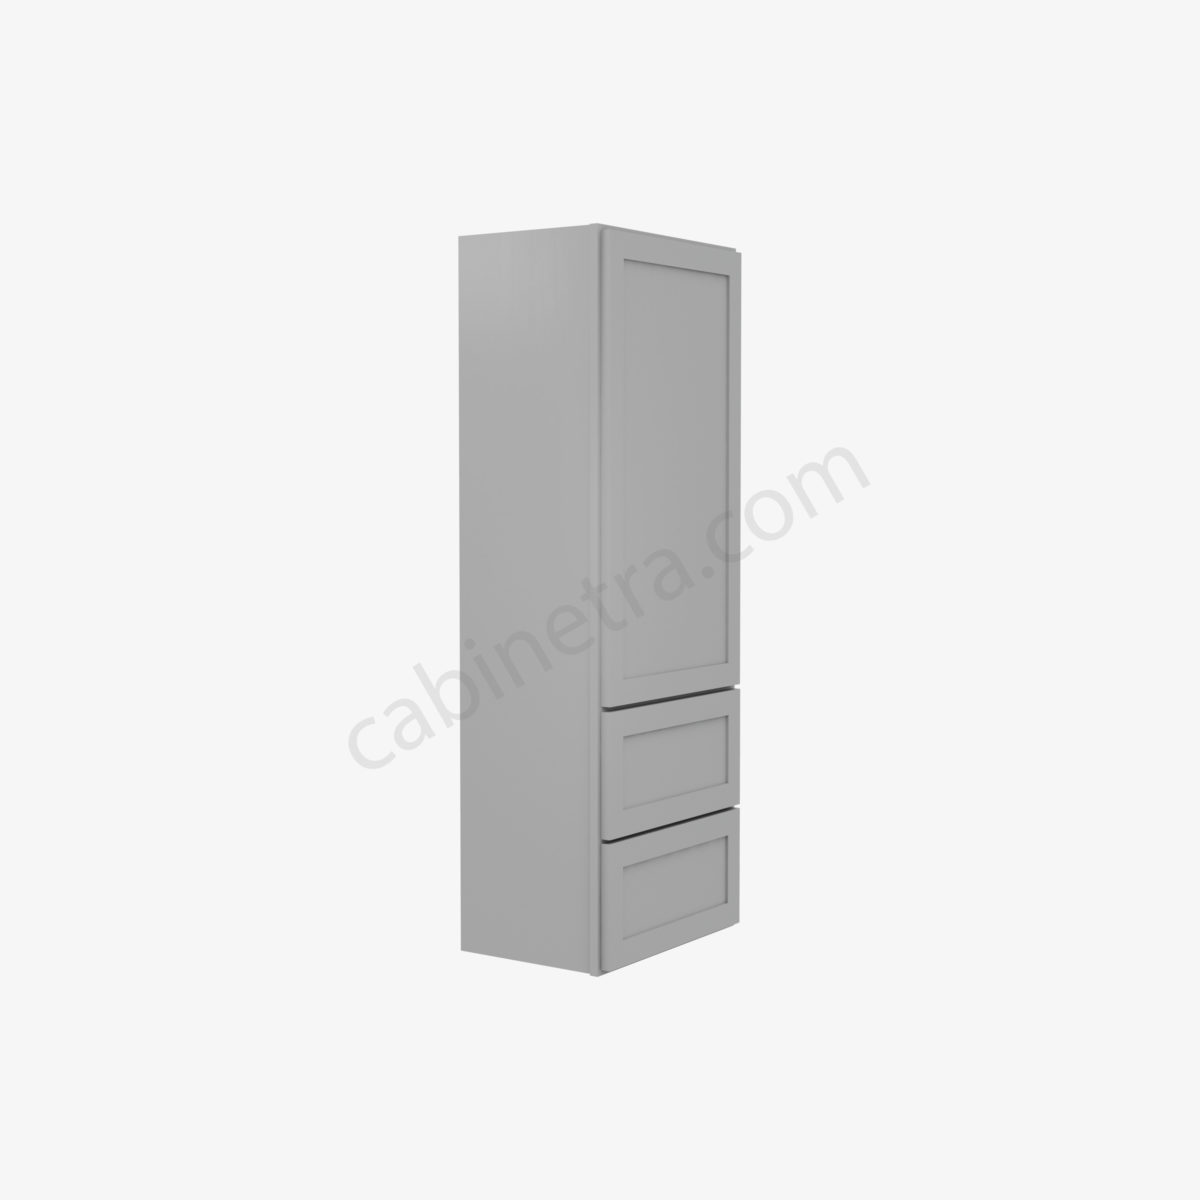 AB W2D1854 4 Forevermark Lait Gray Shaker Cabinetra scaled